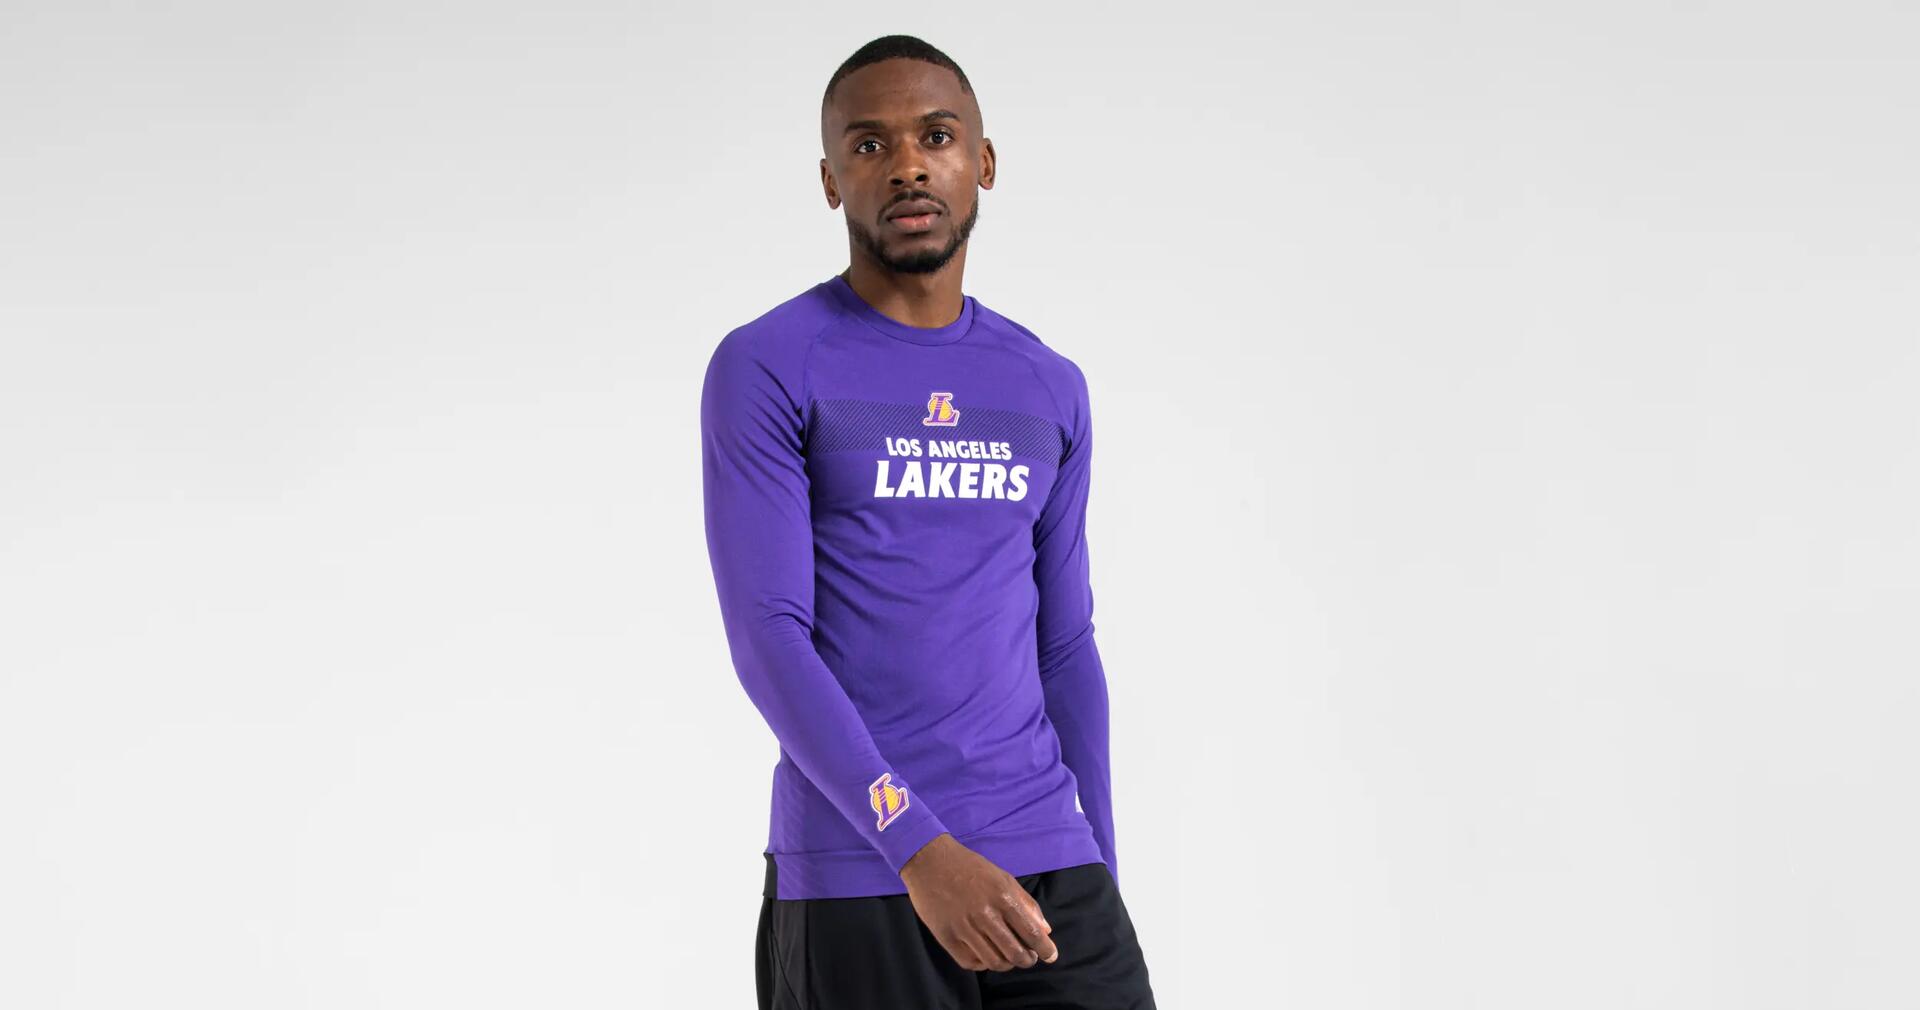 Sous-maillot basketball NBA Los Angeles Lakers Homme/Femme - UT500 Violet